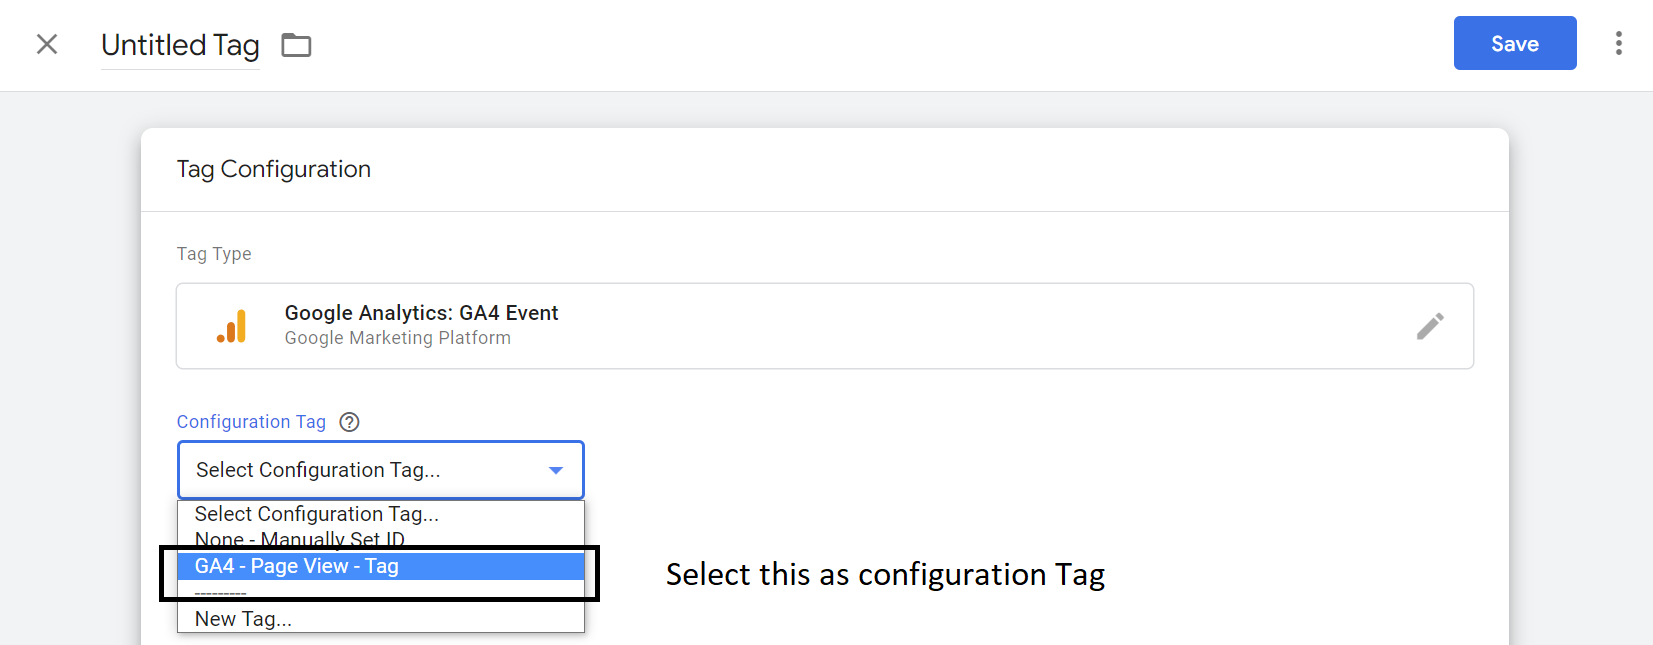 Select Configuration Tag form the drop down